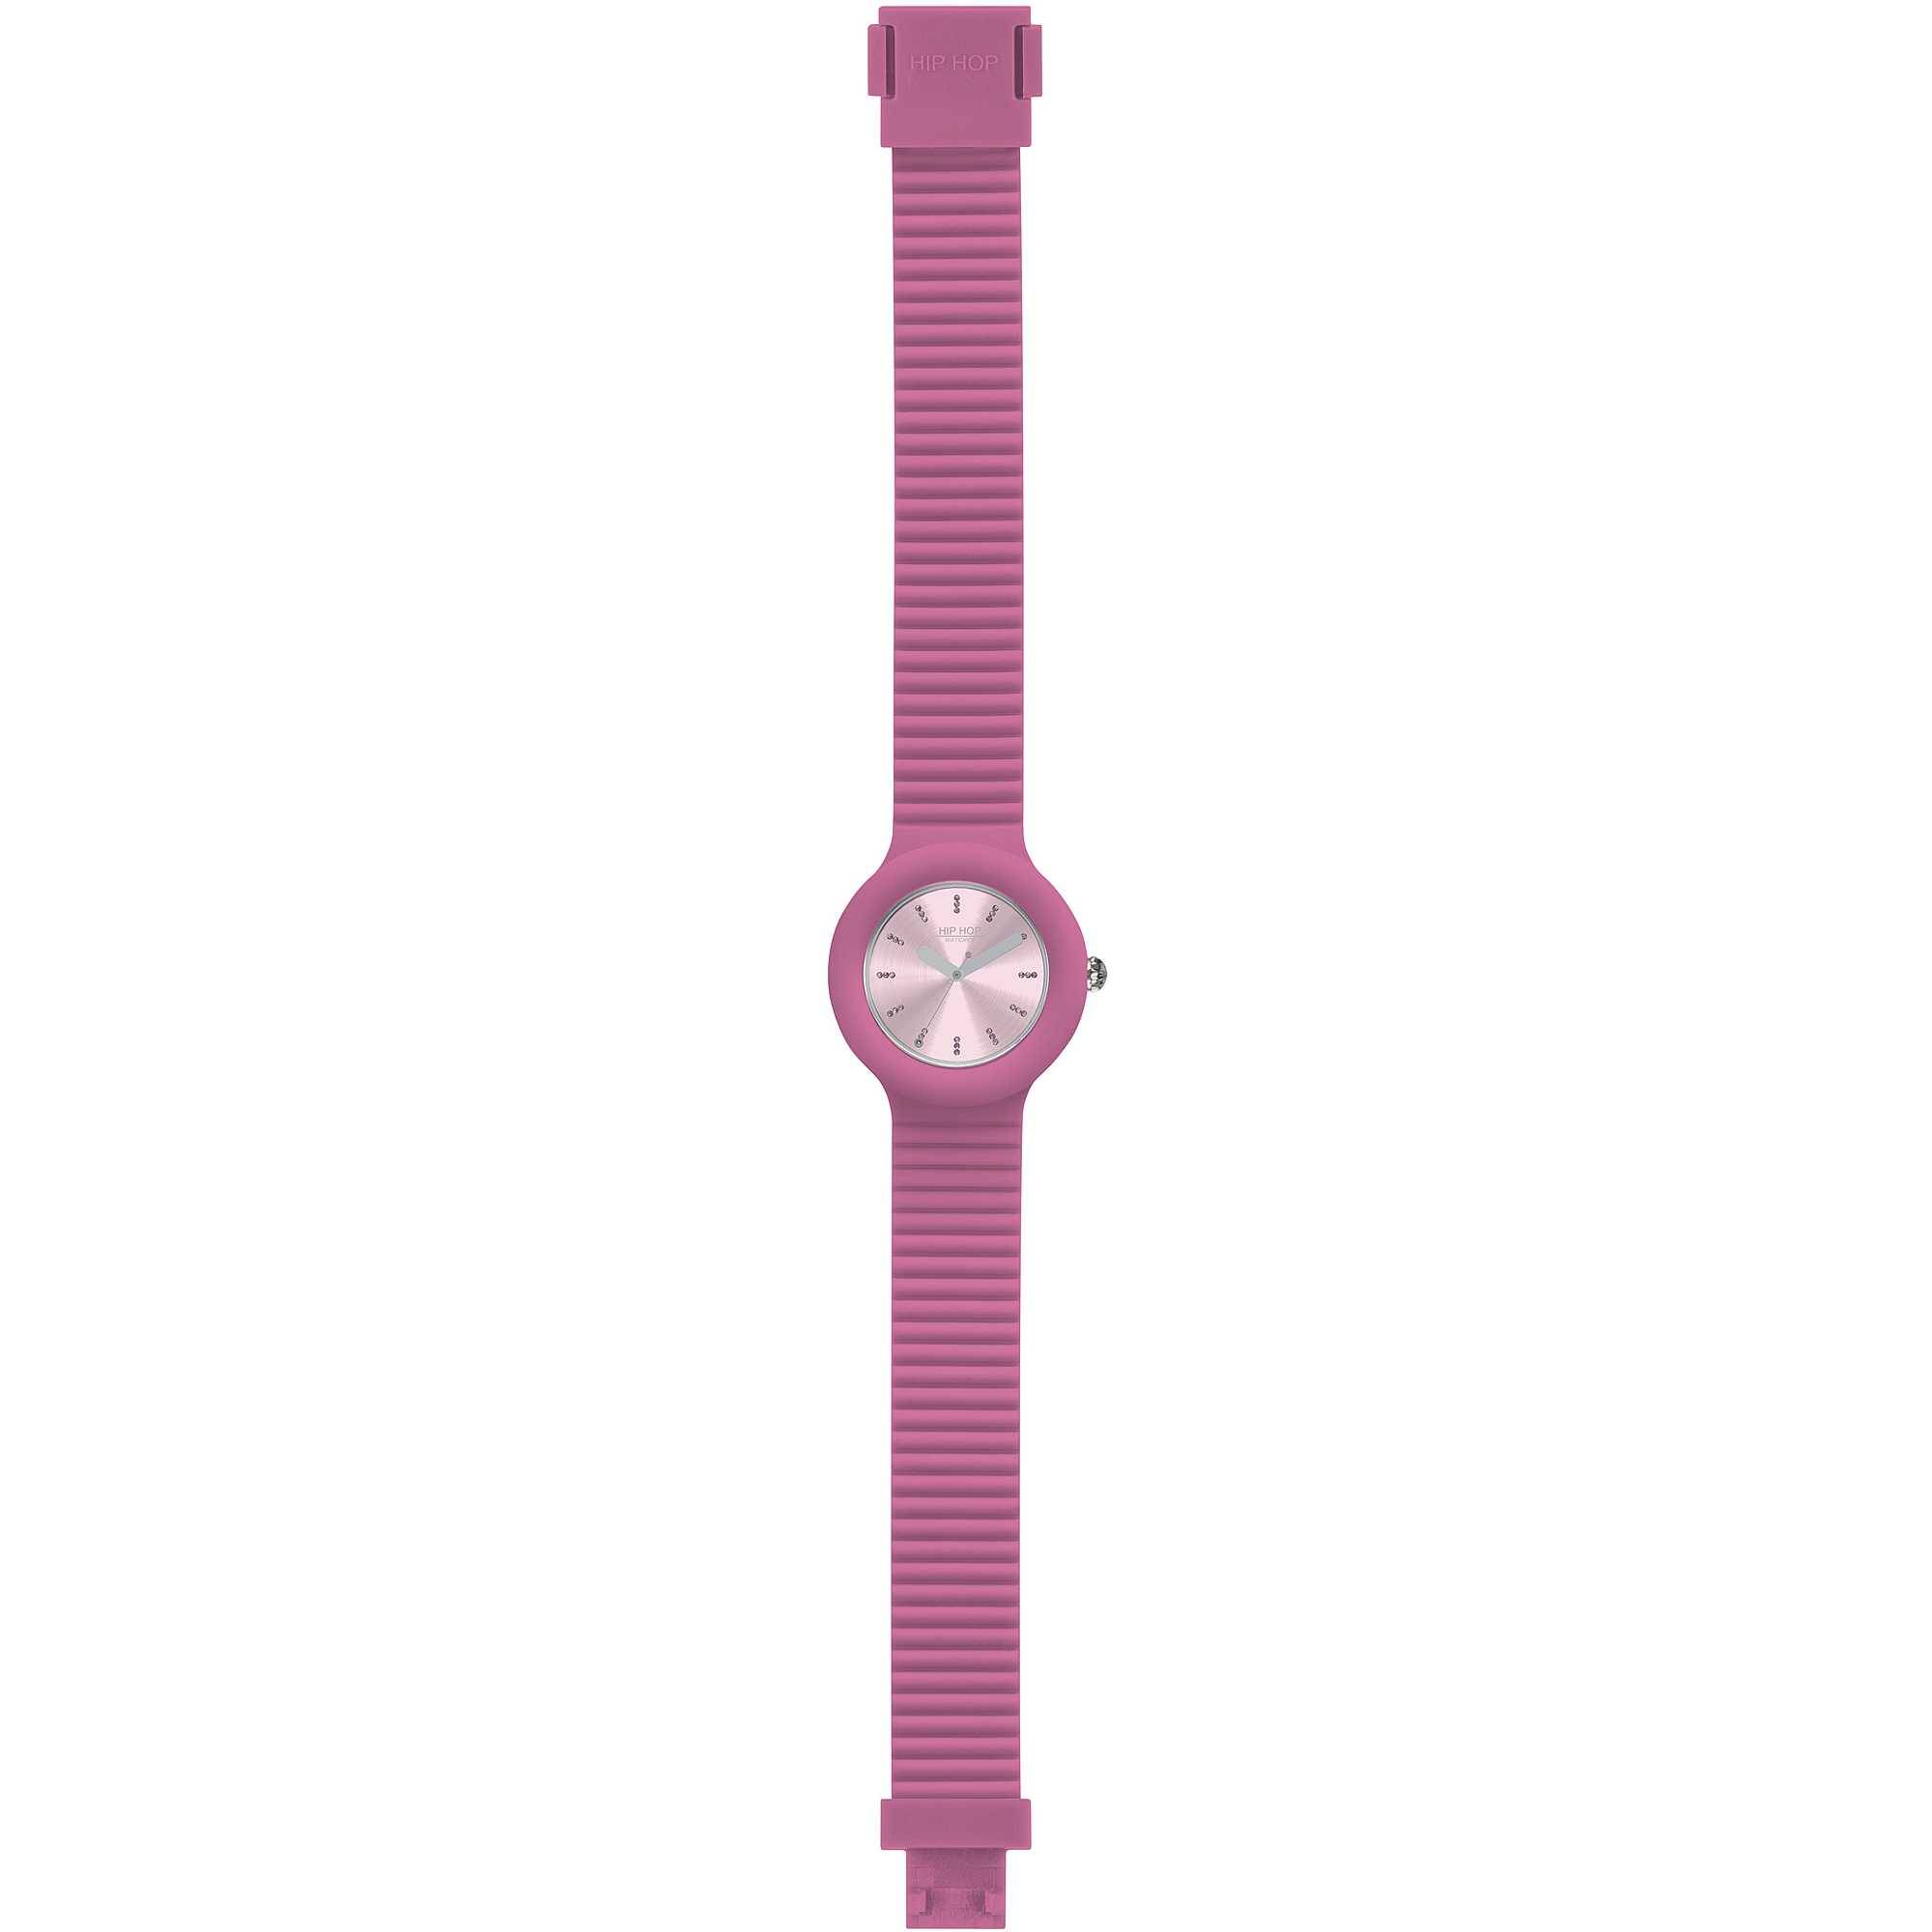 Orologio Hip Hop Starry Candy Pink